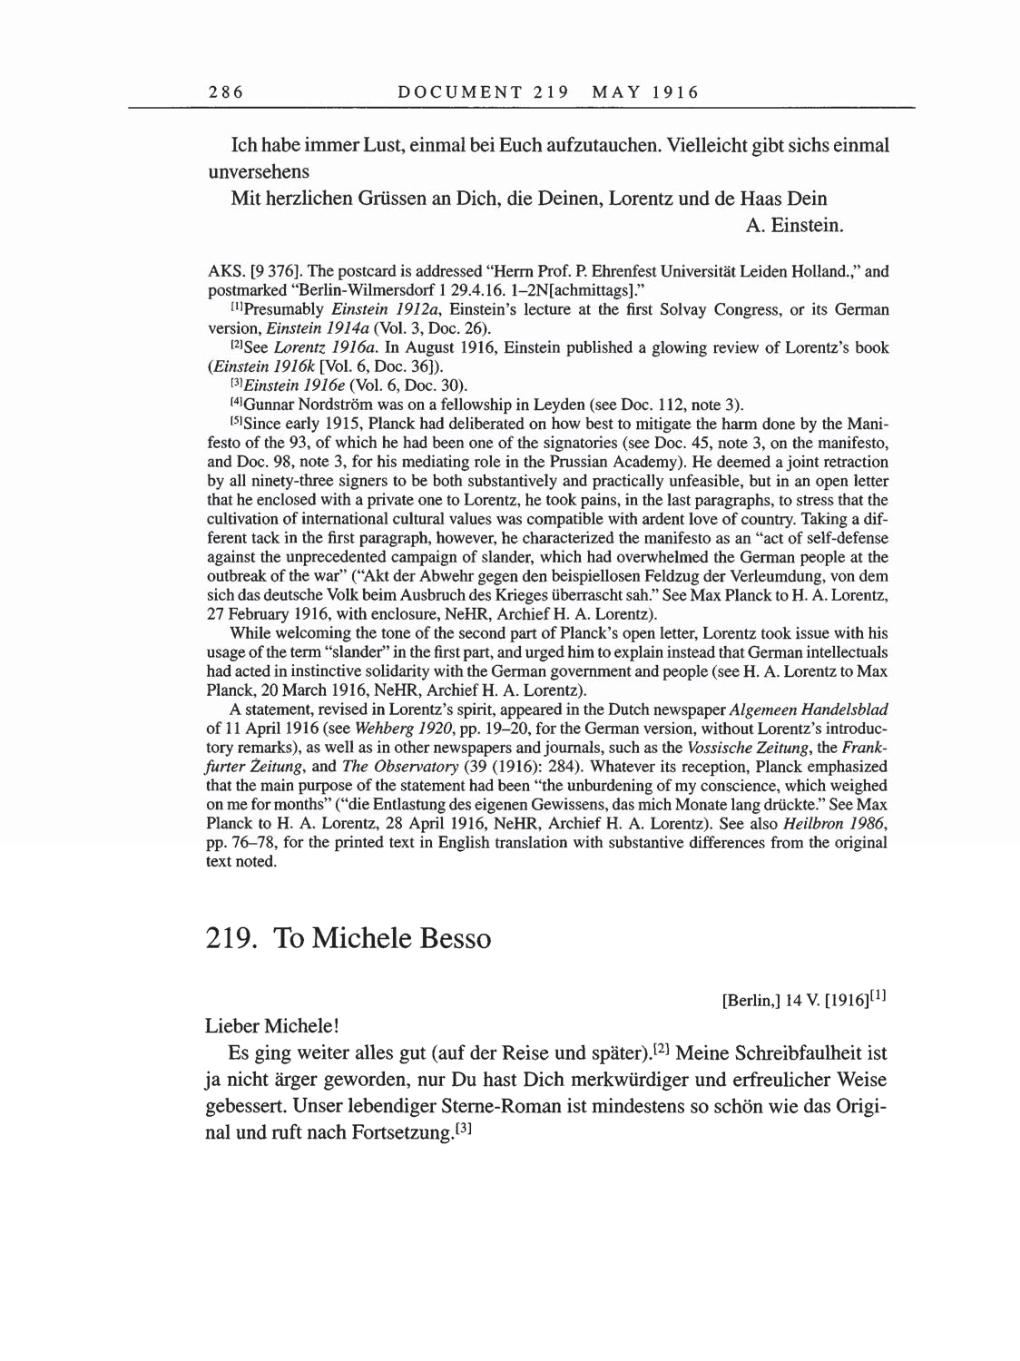 Volume 8, Part A: The Berlin Years: Correspondence 1914-1917 page 286